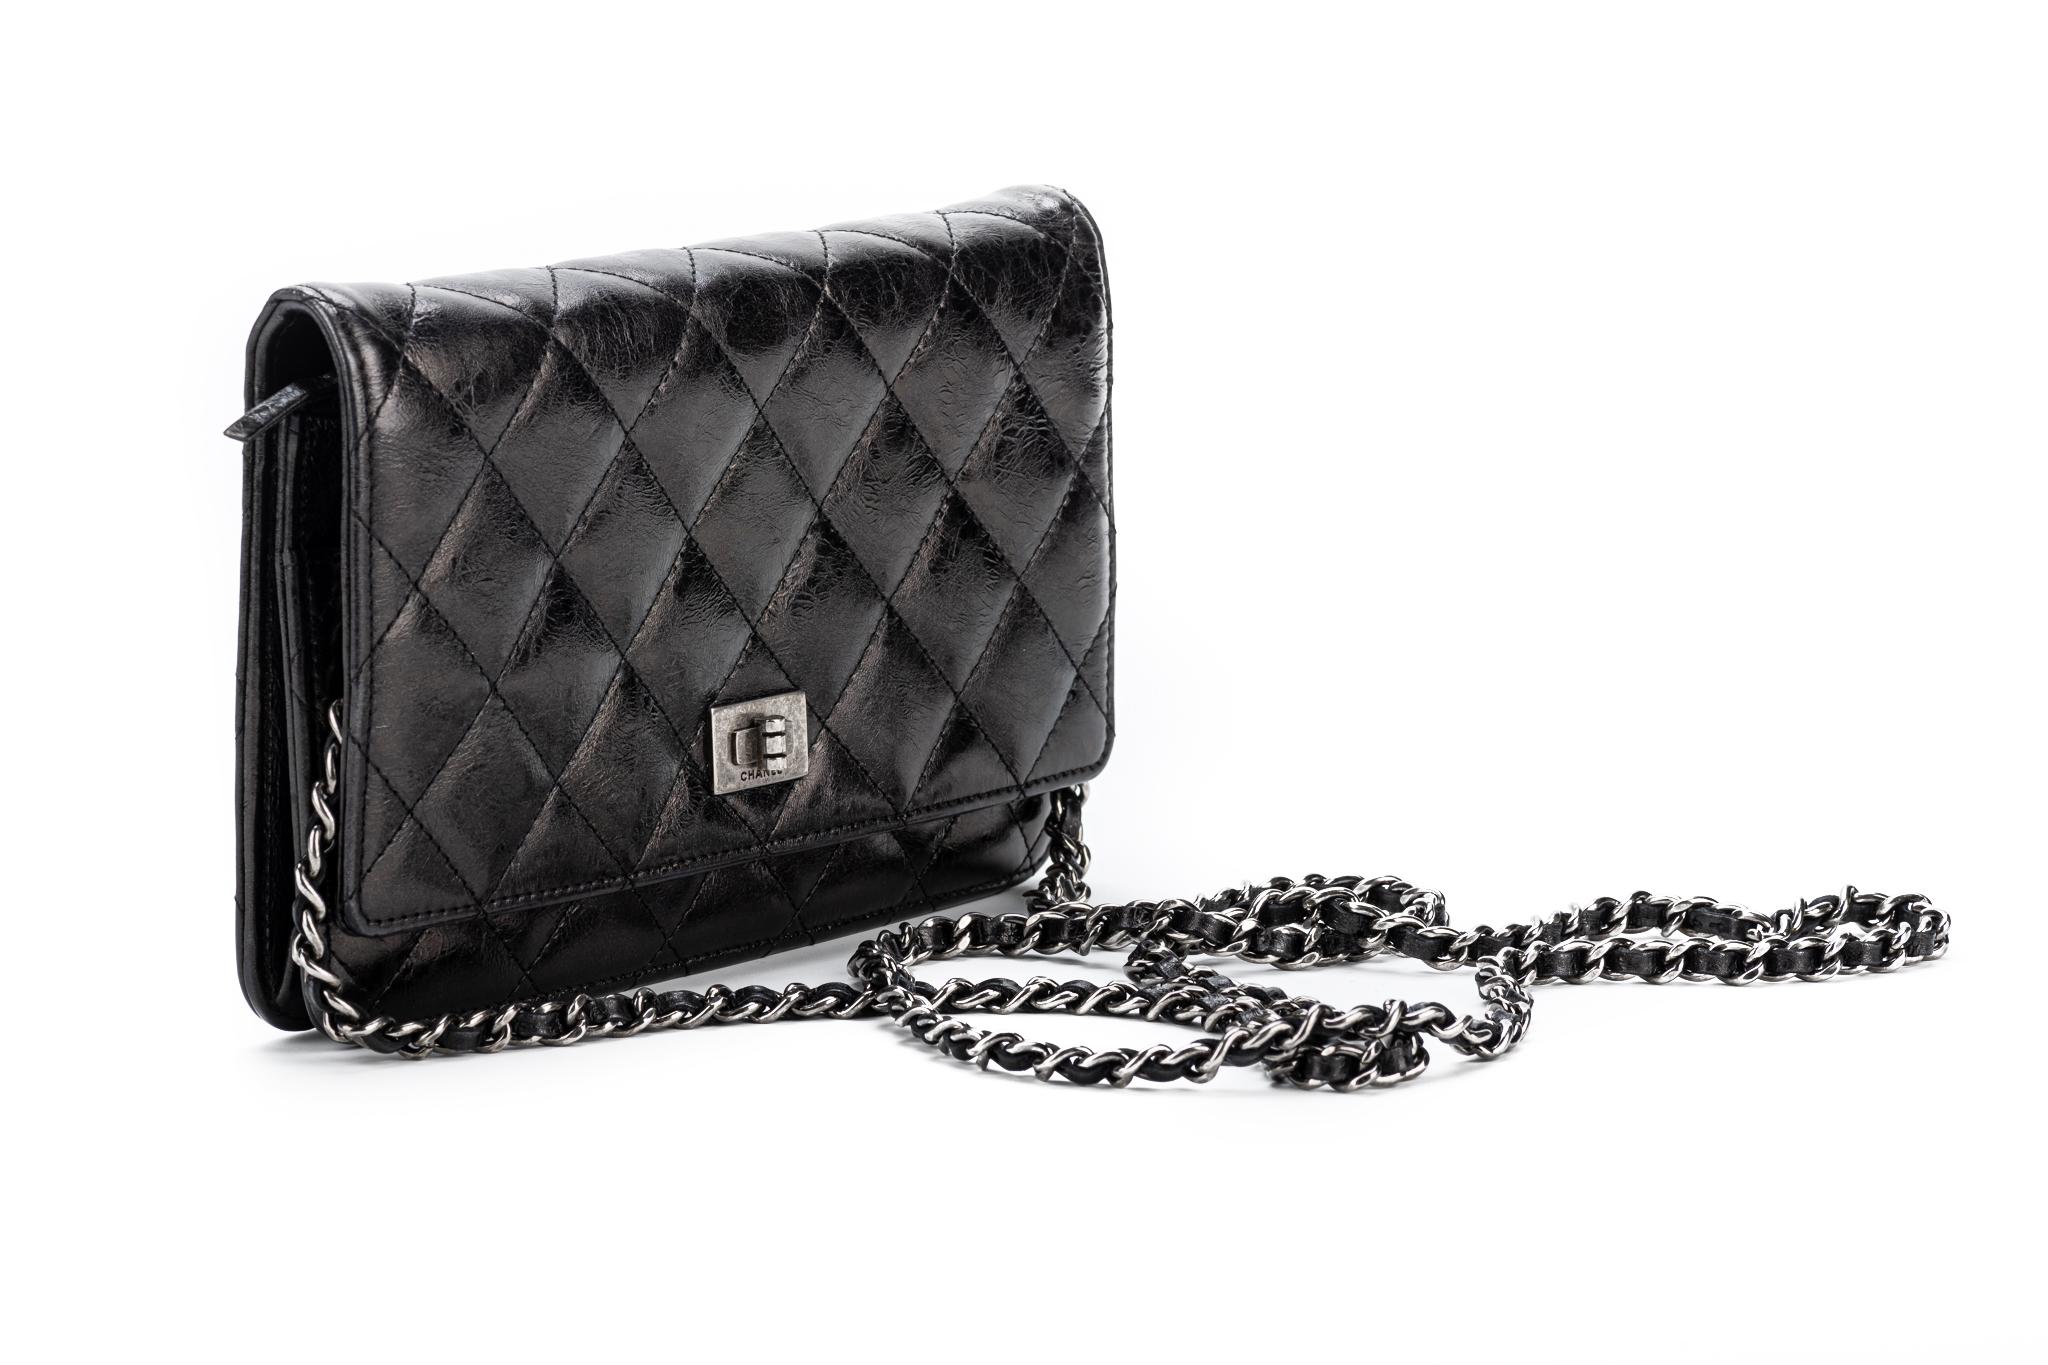 Chanel reissue quilted black leather cross body wallet on a chain. Shoulder drop 25